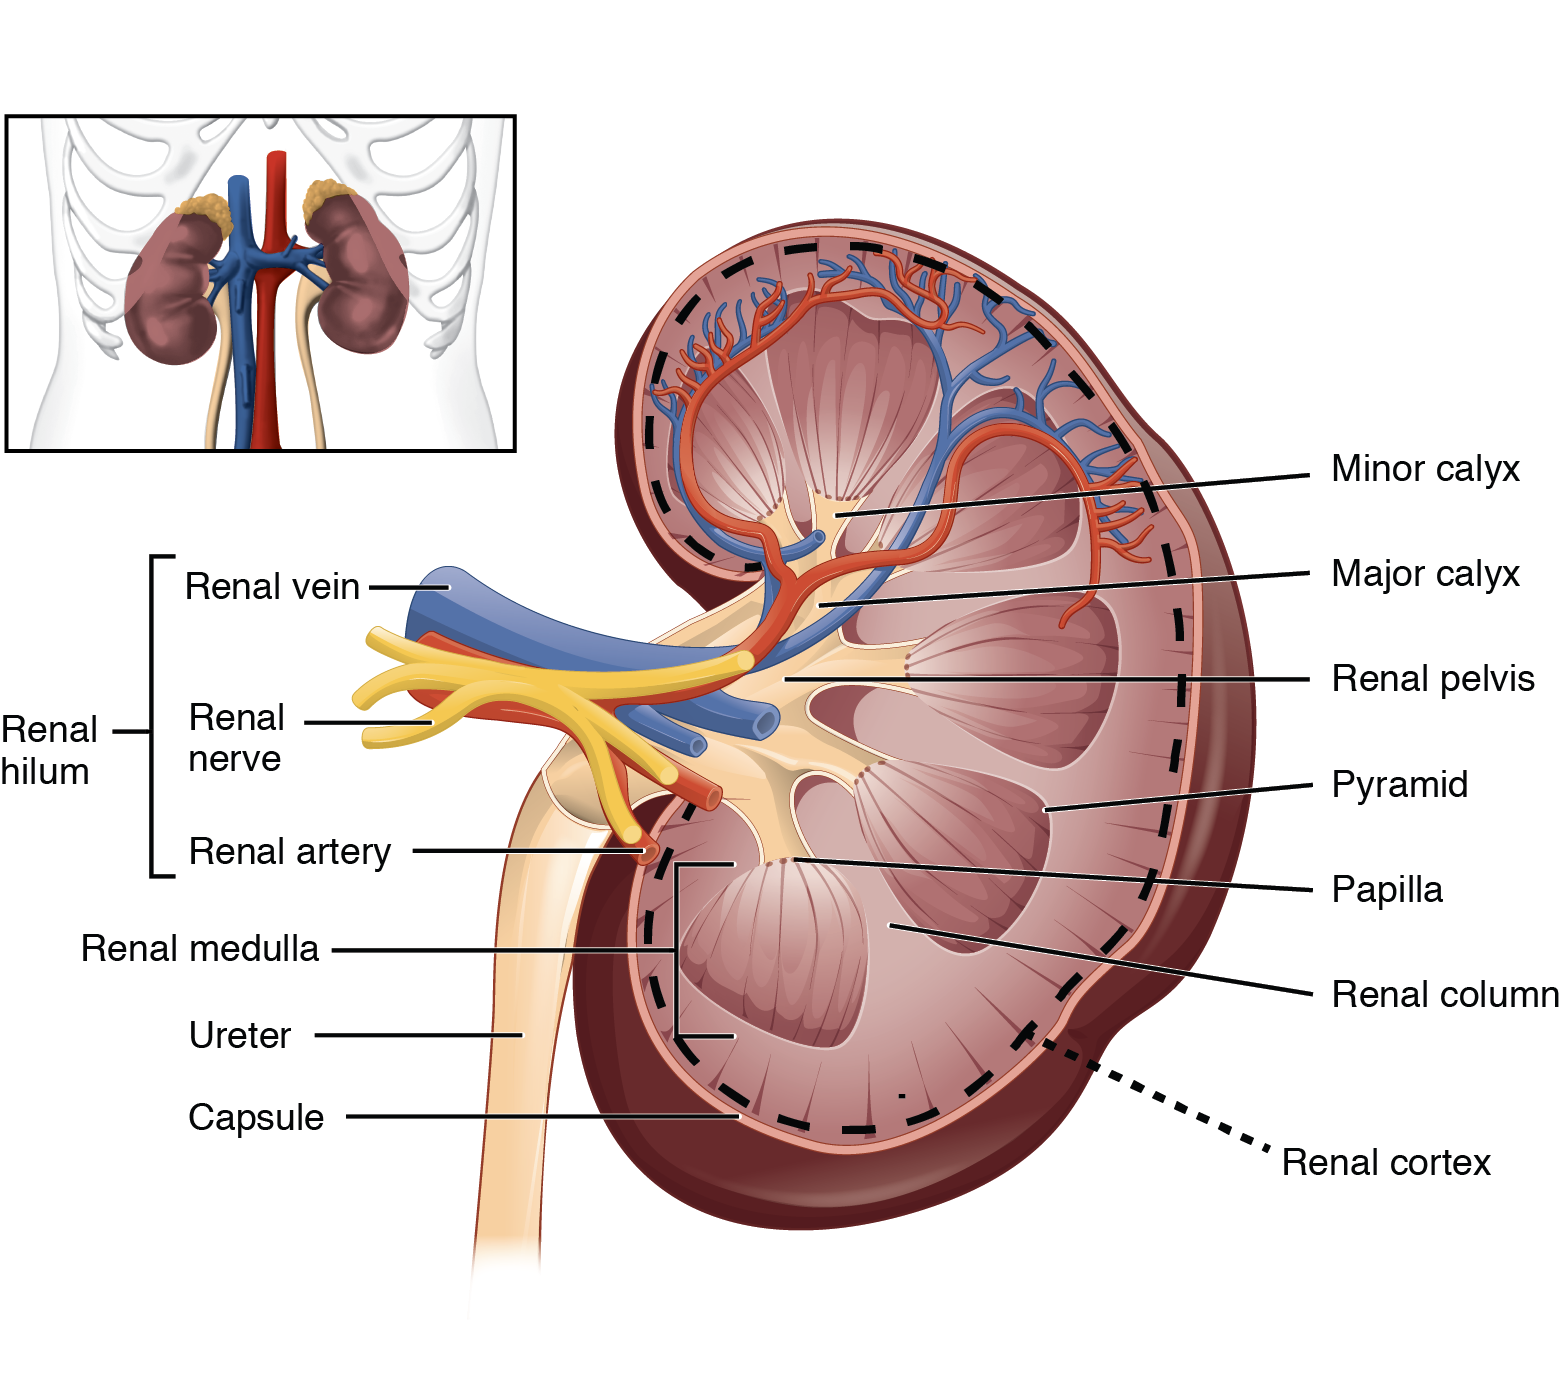 The left panel of this figure shows the location of the kidneys in the abdomen. The right panel shows the cross section of the kidney.